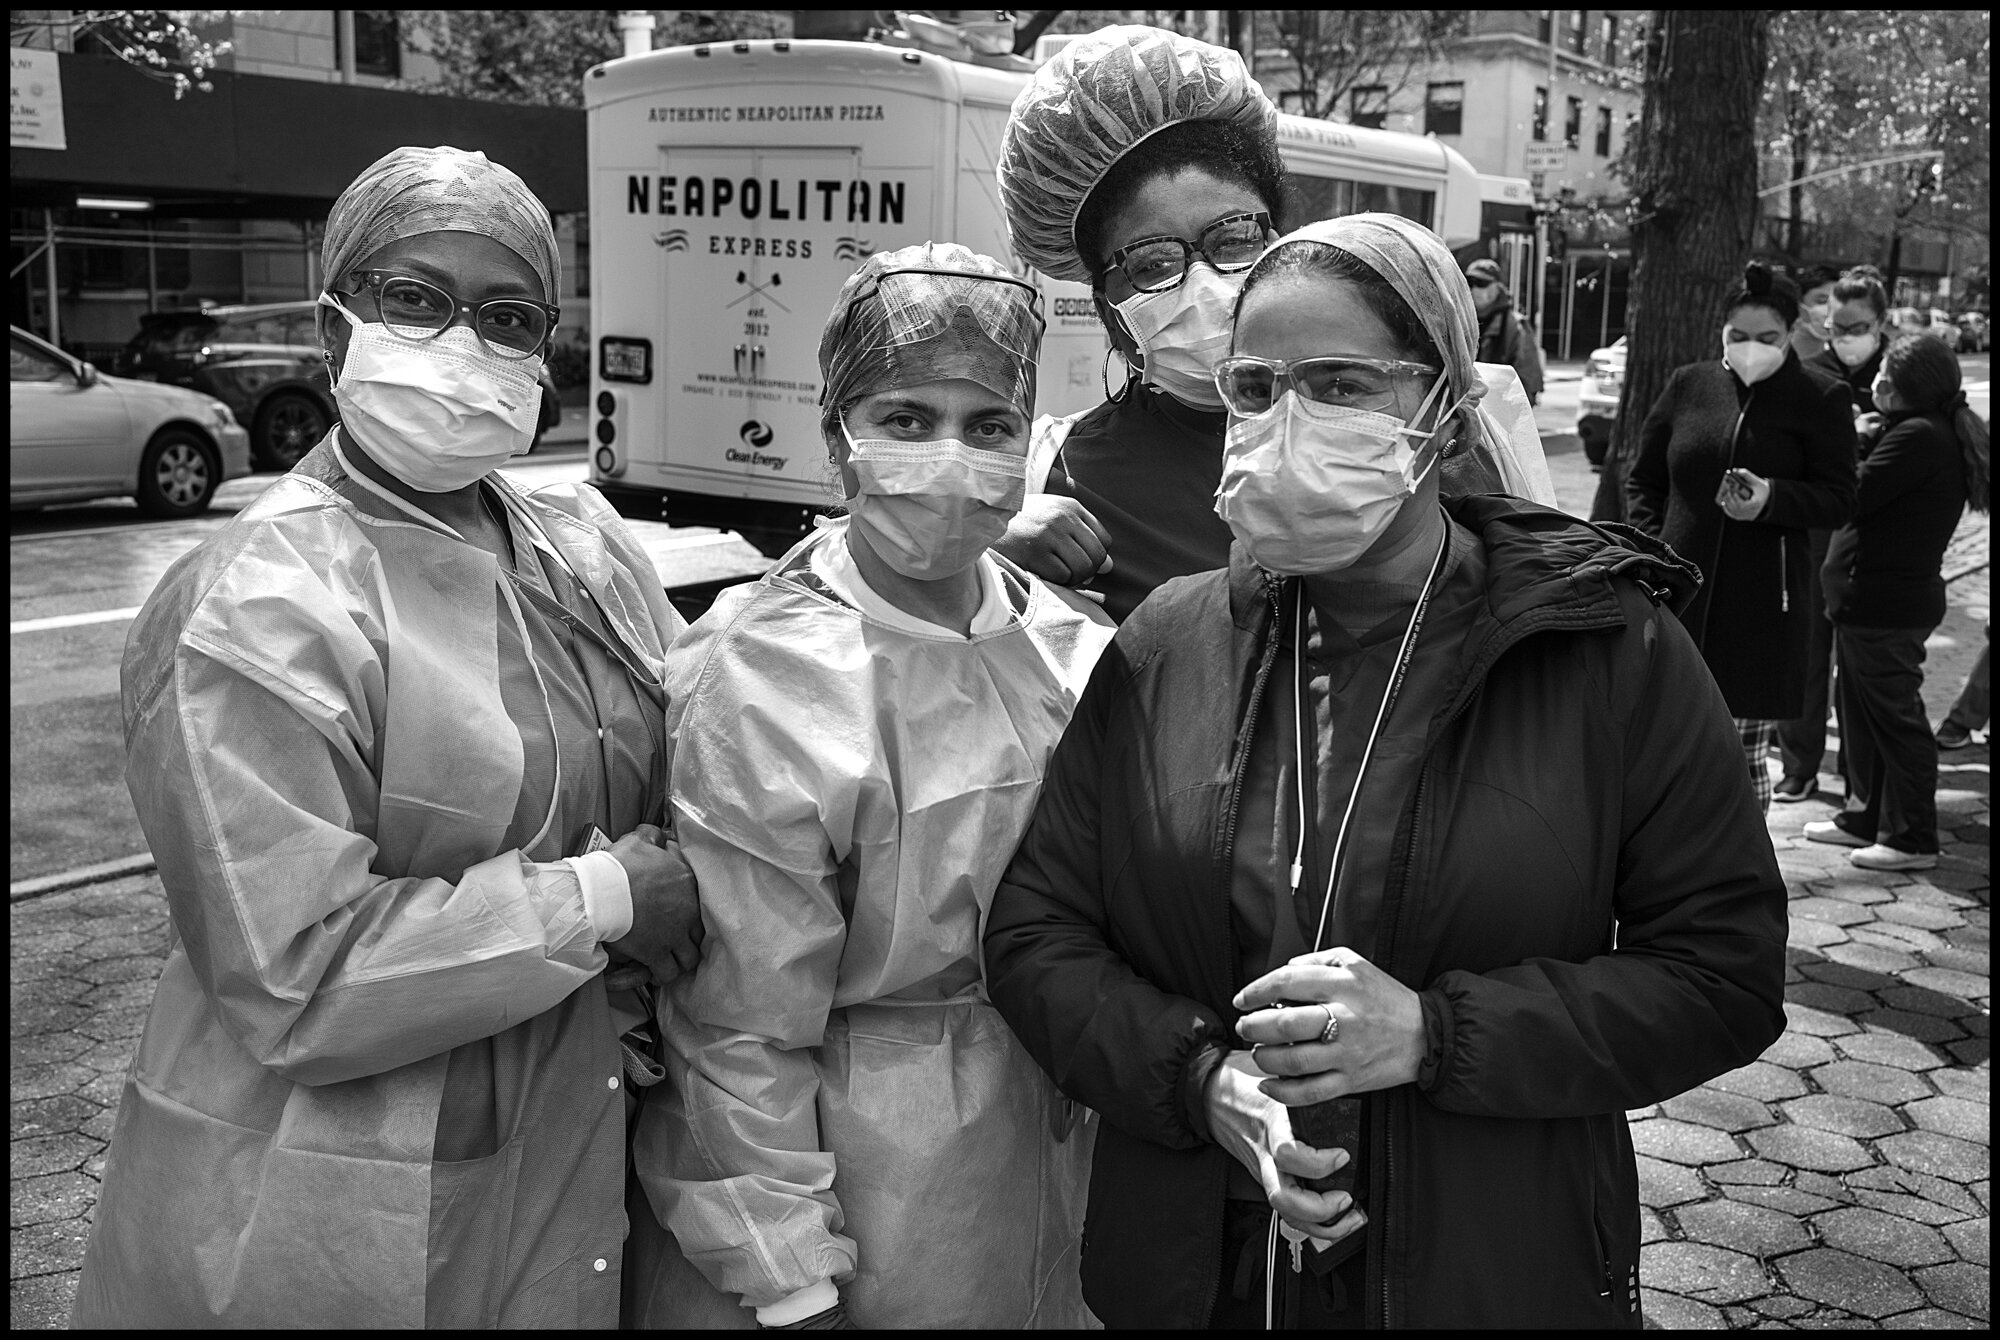  Antonia, Alicia, Arelis, and Jellene are nurses, all involved in treating coronavirus patients at Mount Sinai Hospital in New York.   April 17, 2020. © Peter Turnley  ID# 23-012 